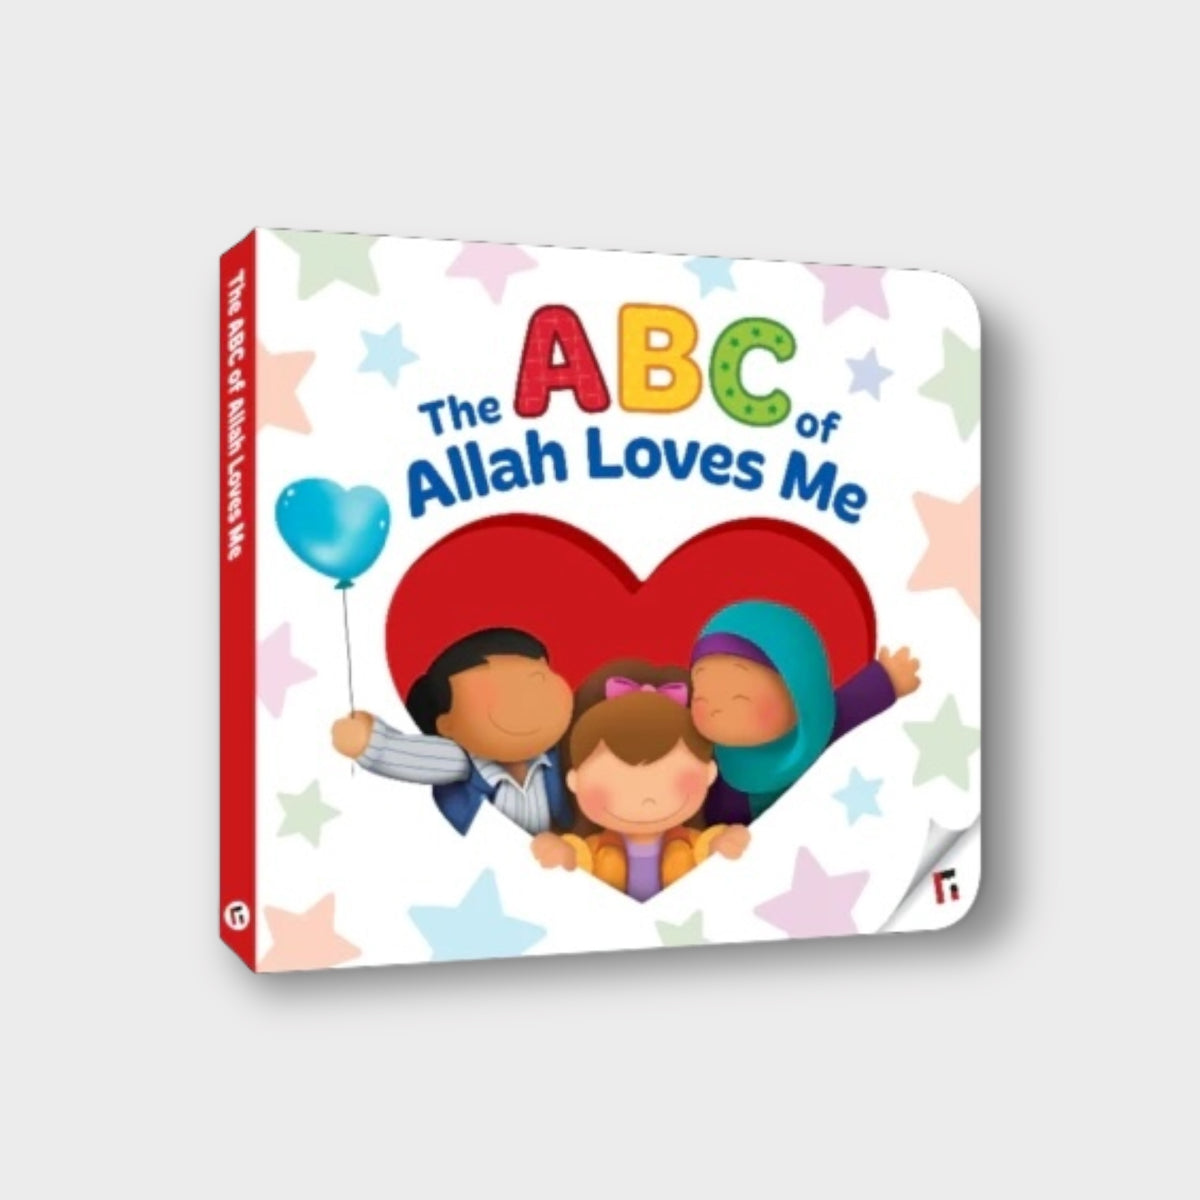 THE ABC OF ALLAH LOVES ME - JLifestyle Store